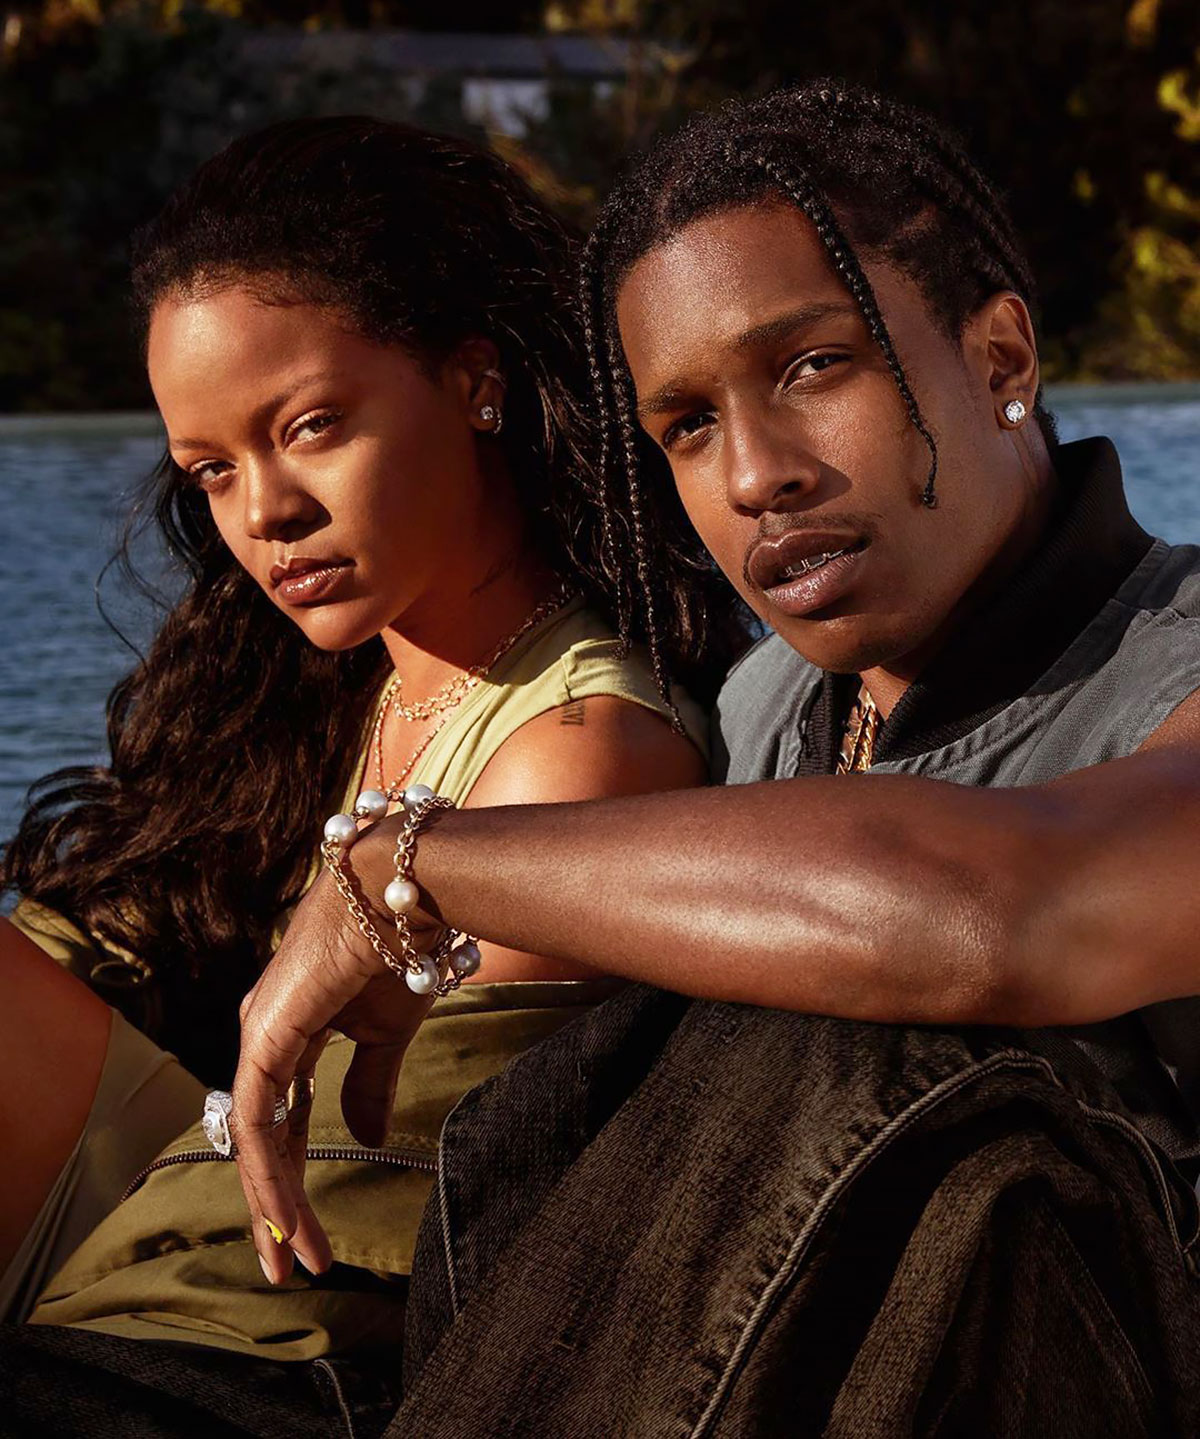 Rihanna And Asap Rockys Relationship Timeline